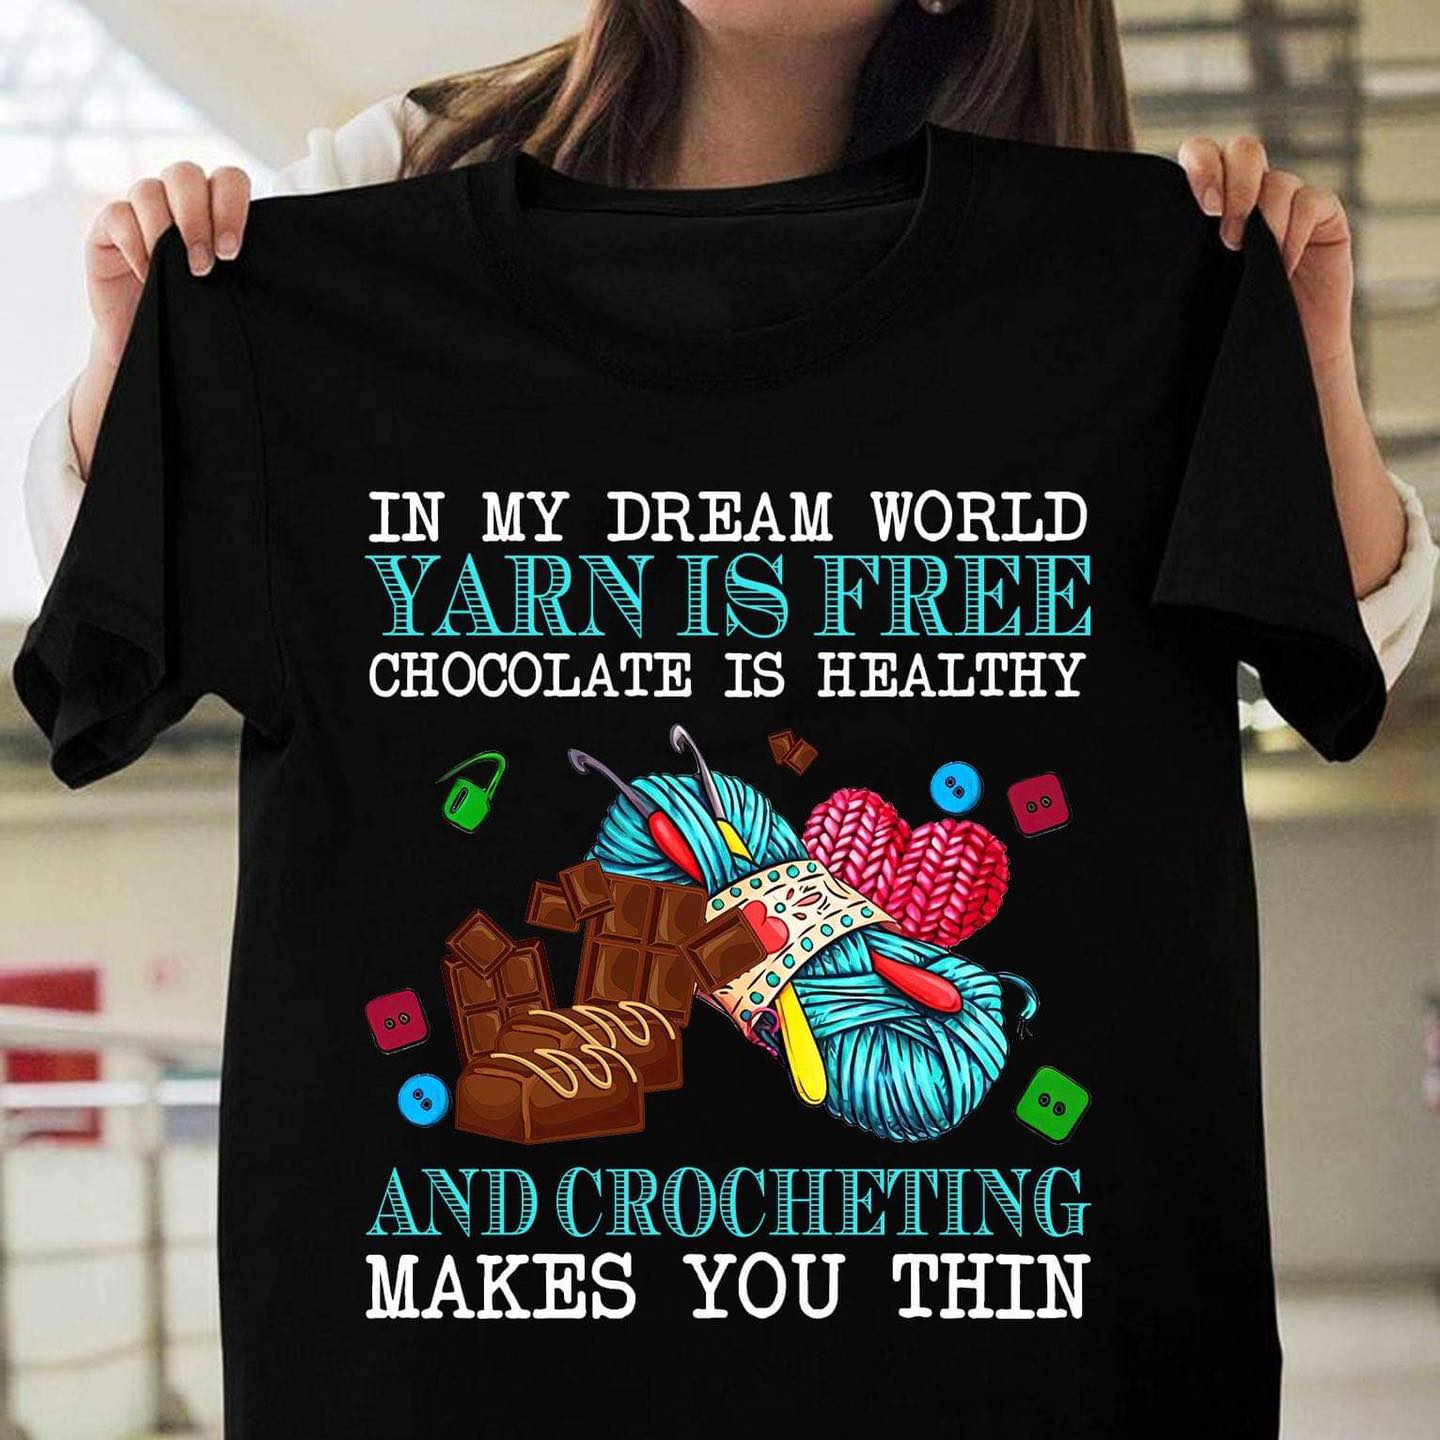 Chocolate Crocheting - In my dream world yarn is free chocolate is healthy and crocheting makes you thin